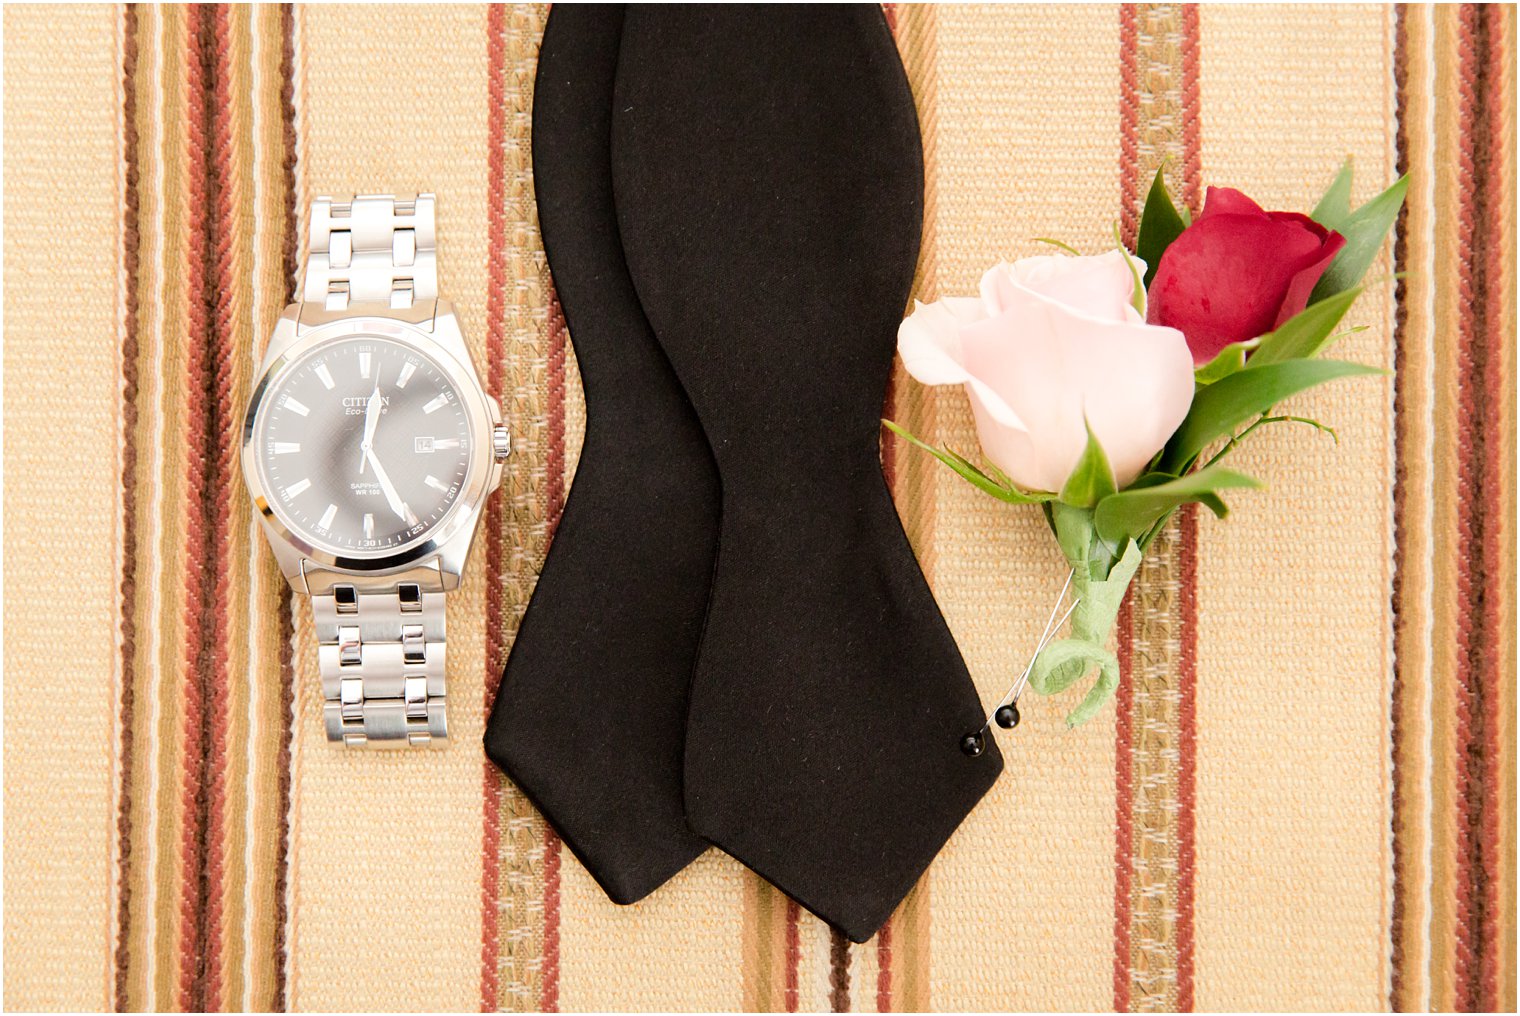 Groom's watch, bow tie, and boutonniere by Pod Shop Flowers